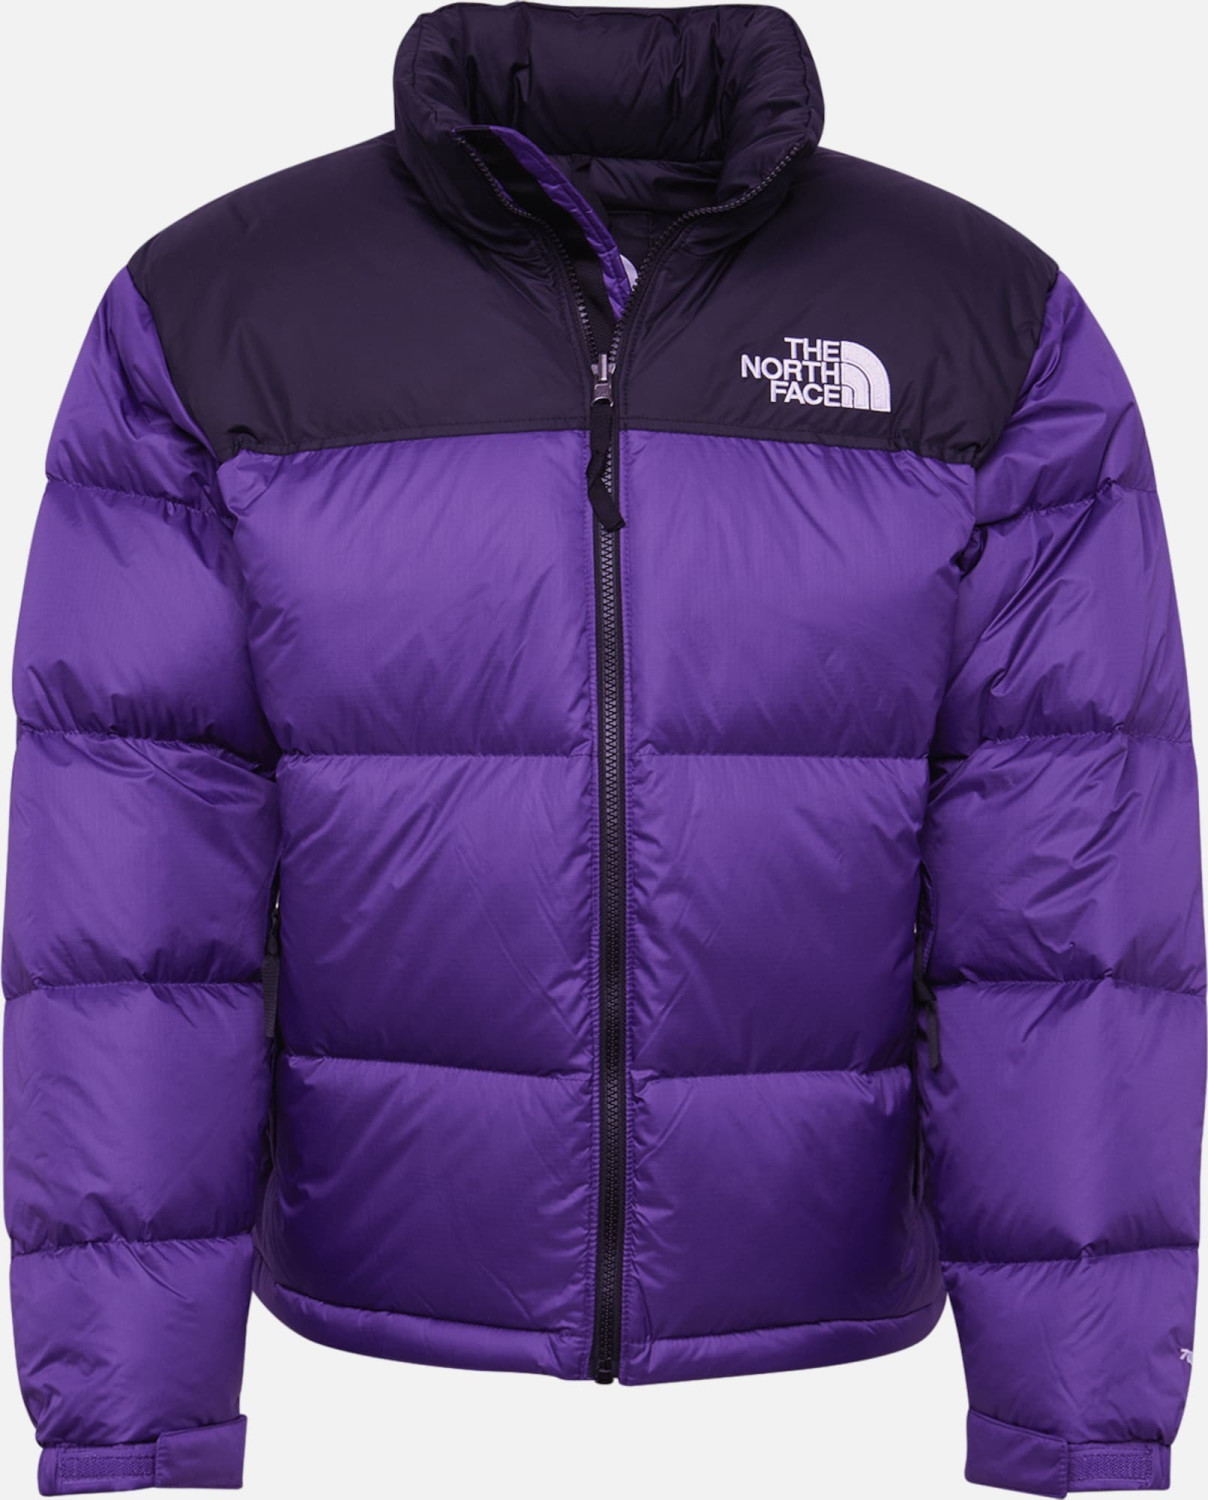 Buy The North Face 1996 Retro Nuptse Jacket Purple From £315 00 Today Best Black Friday